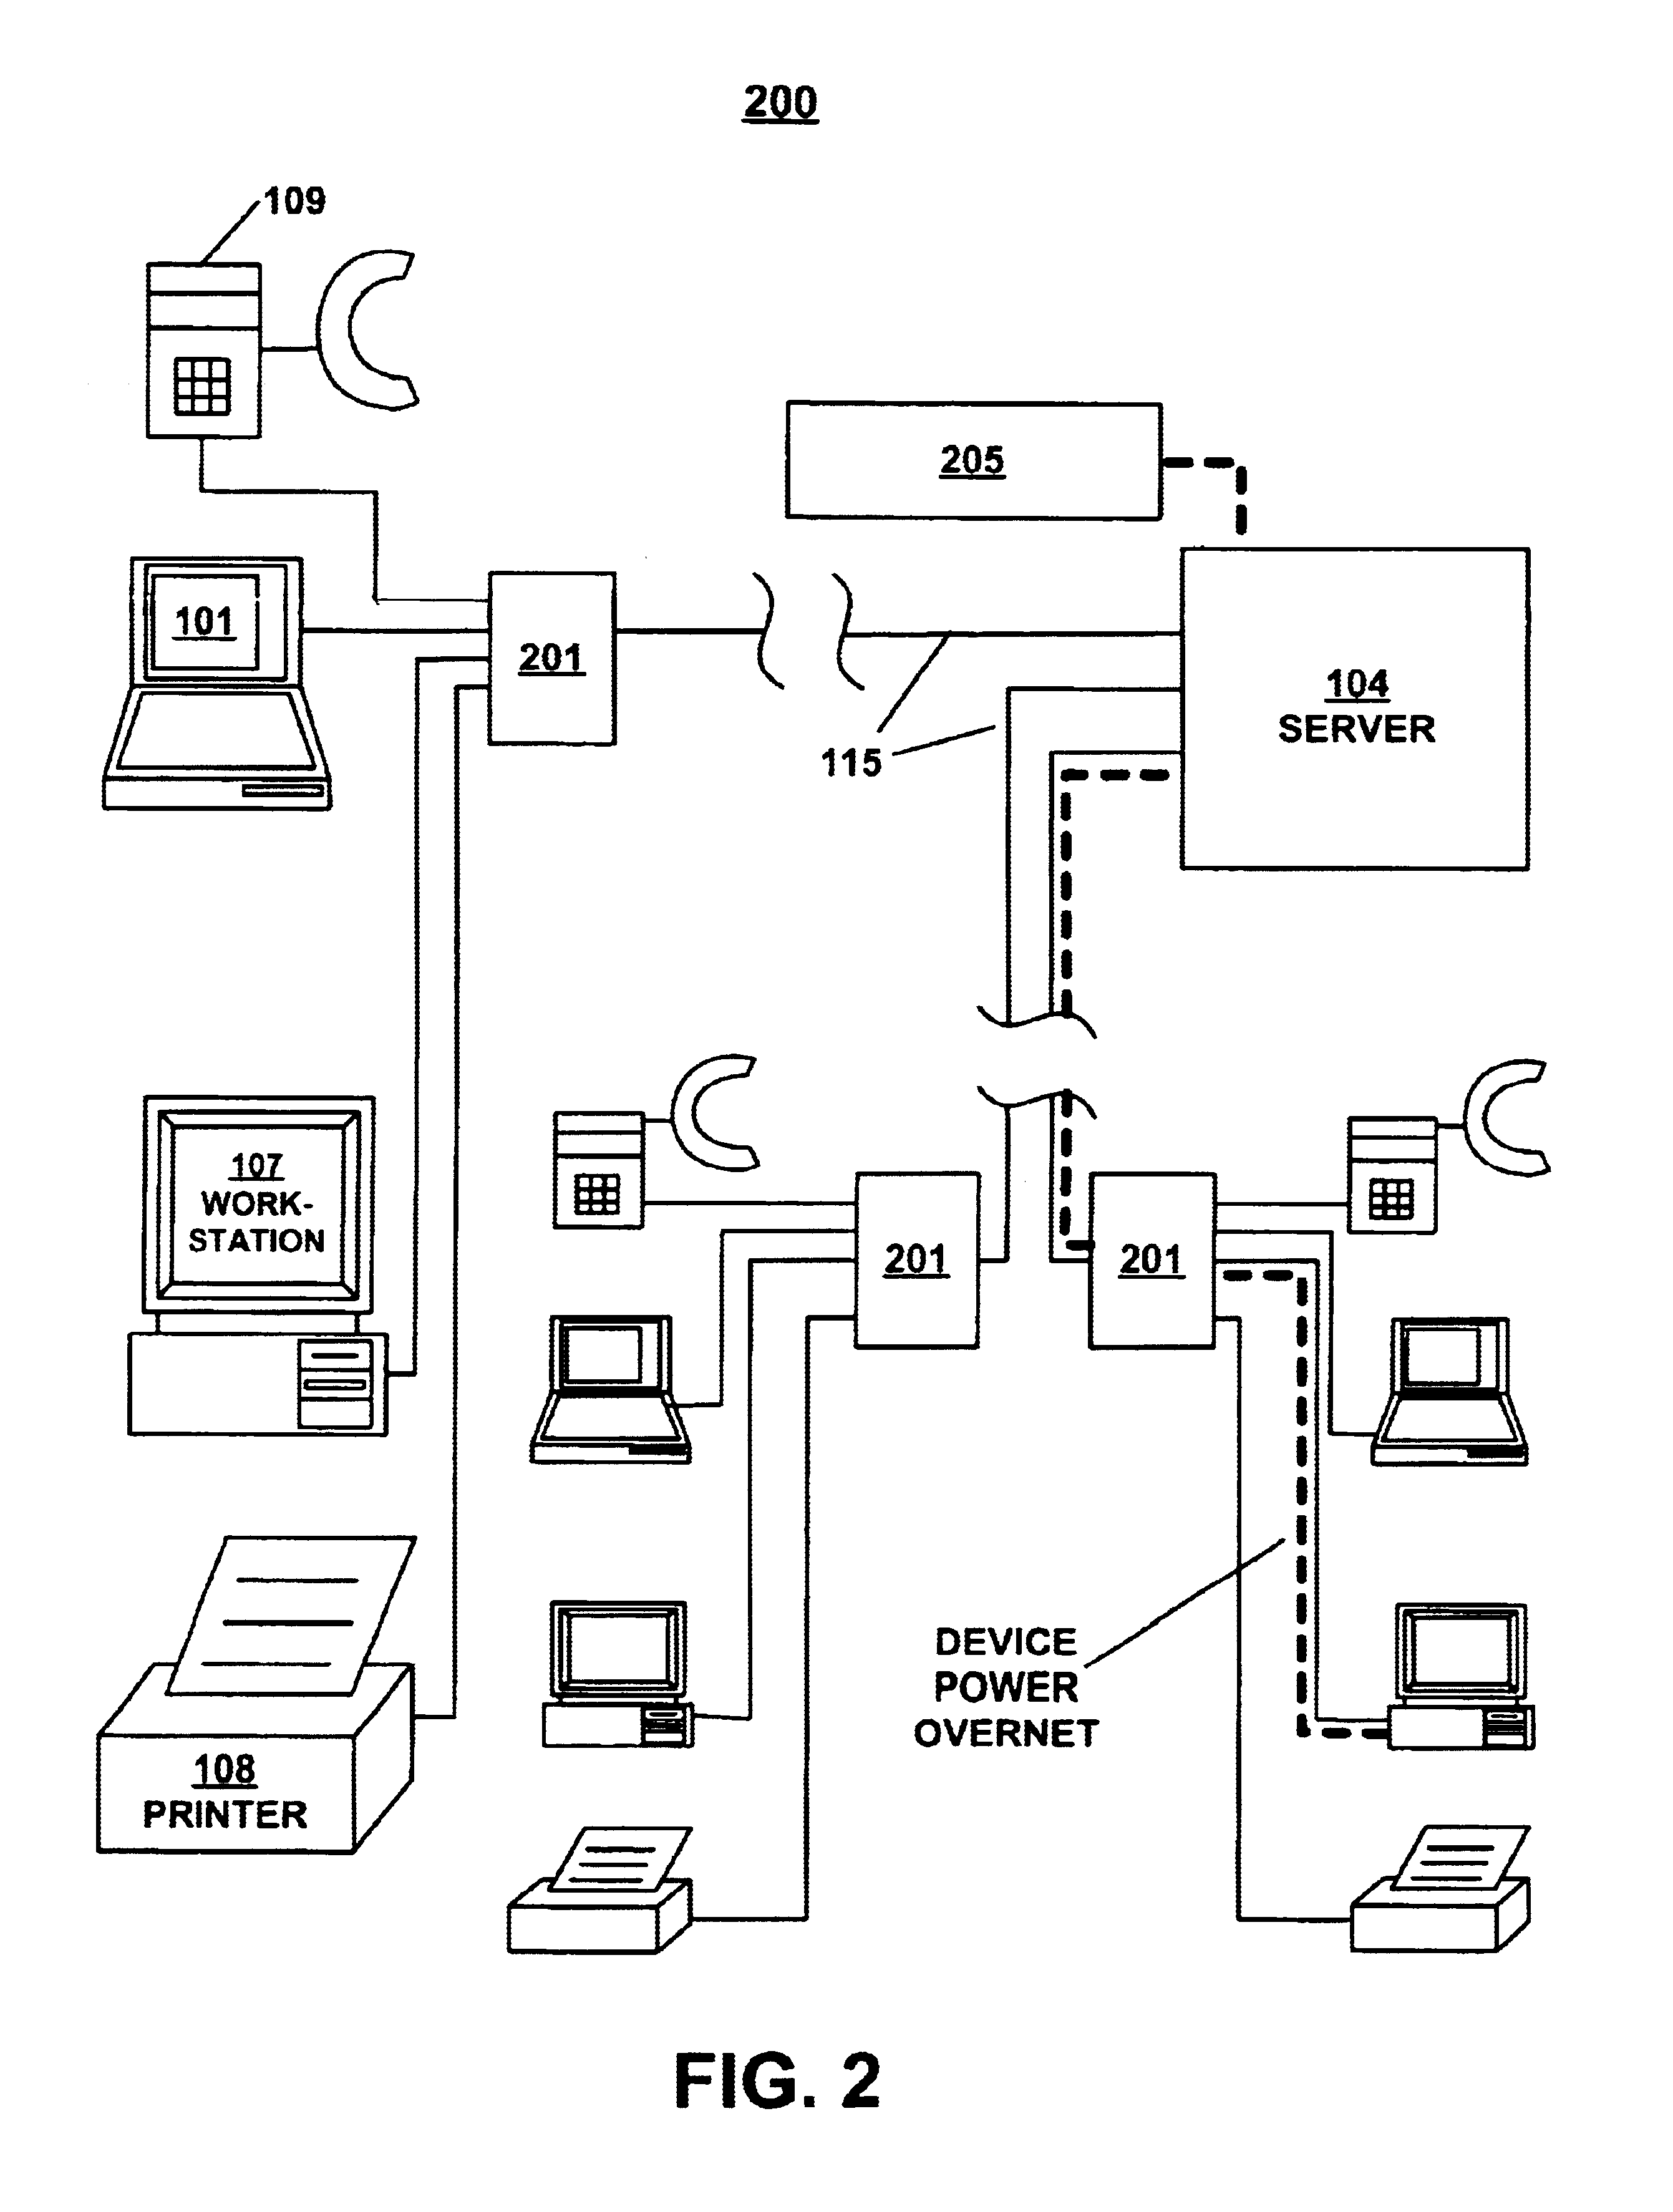 Method and system for installing different communications jacks into an intelligent data concentrator